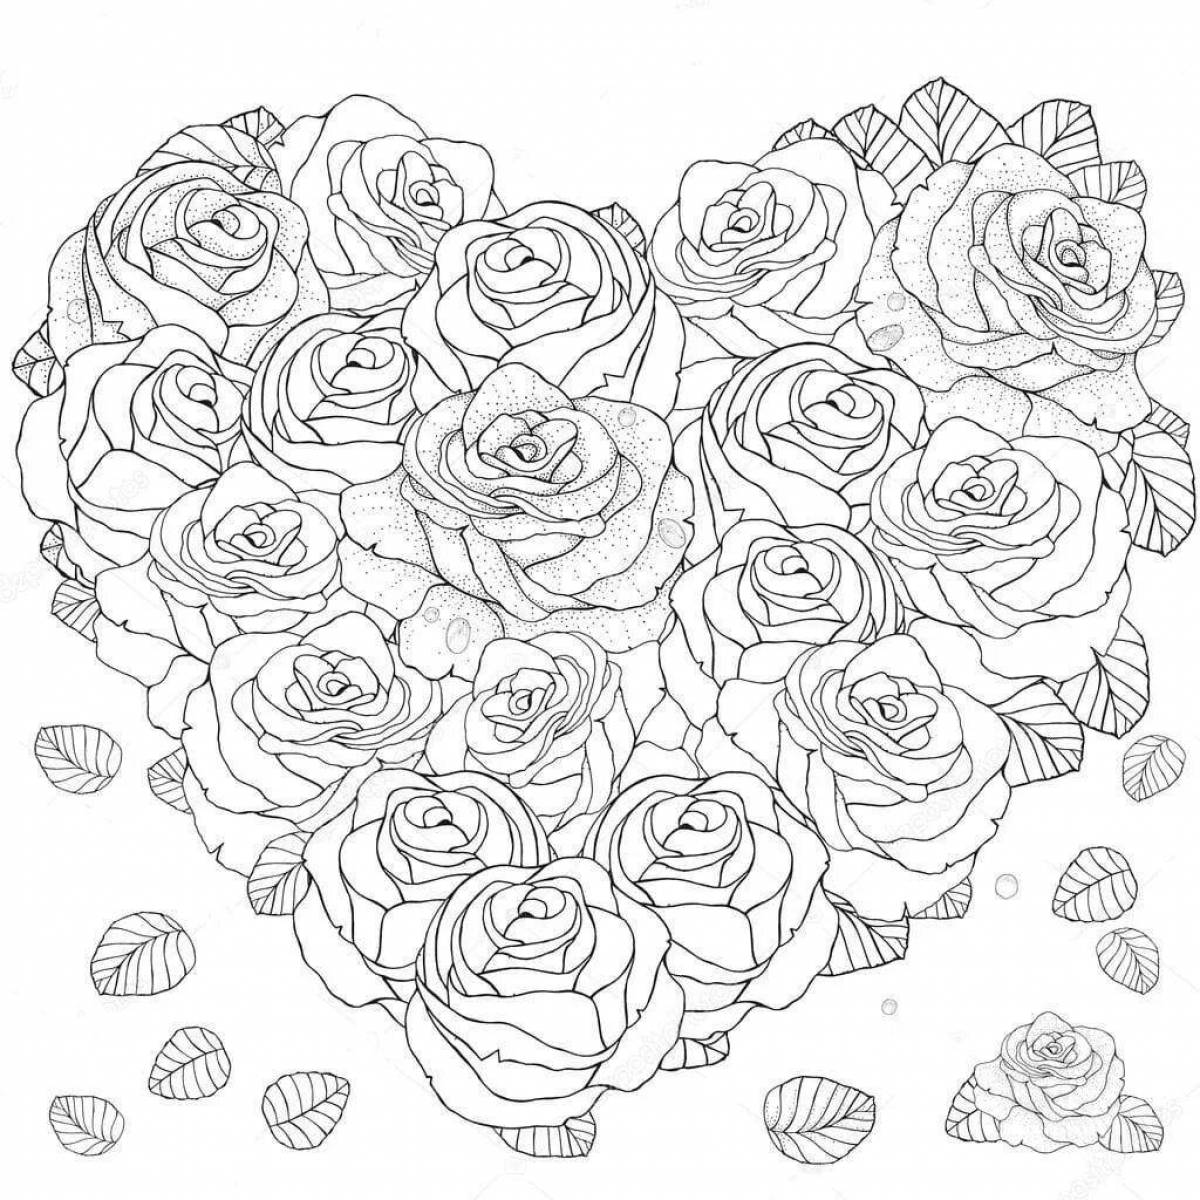 Royal happy birthday coloring pages with roses